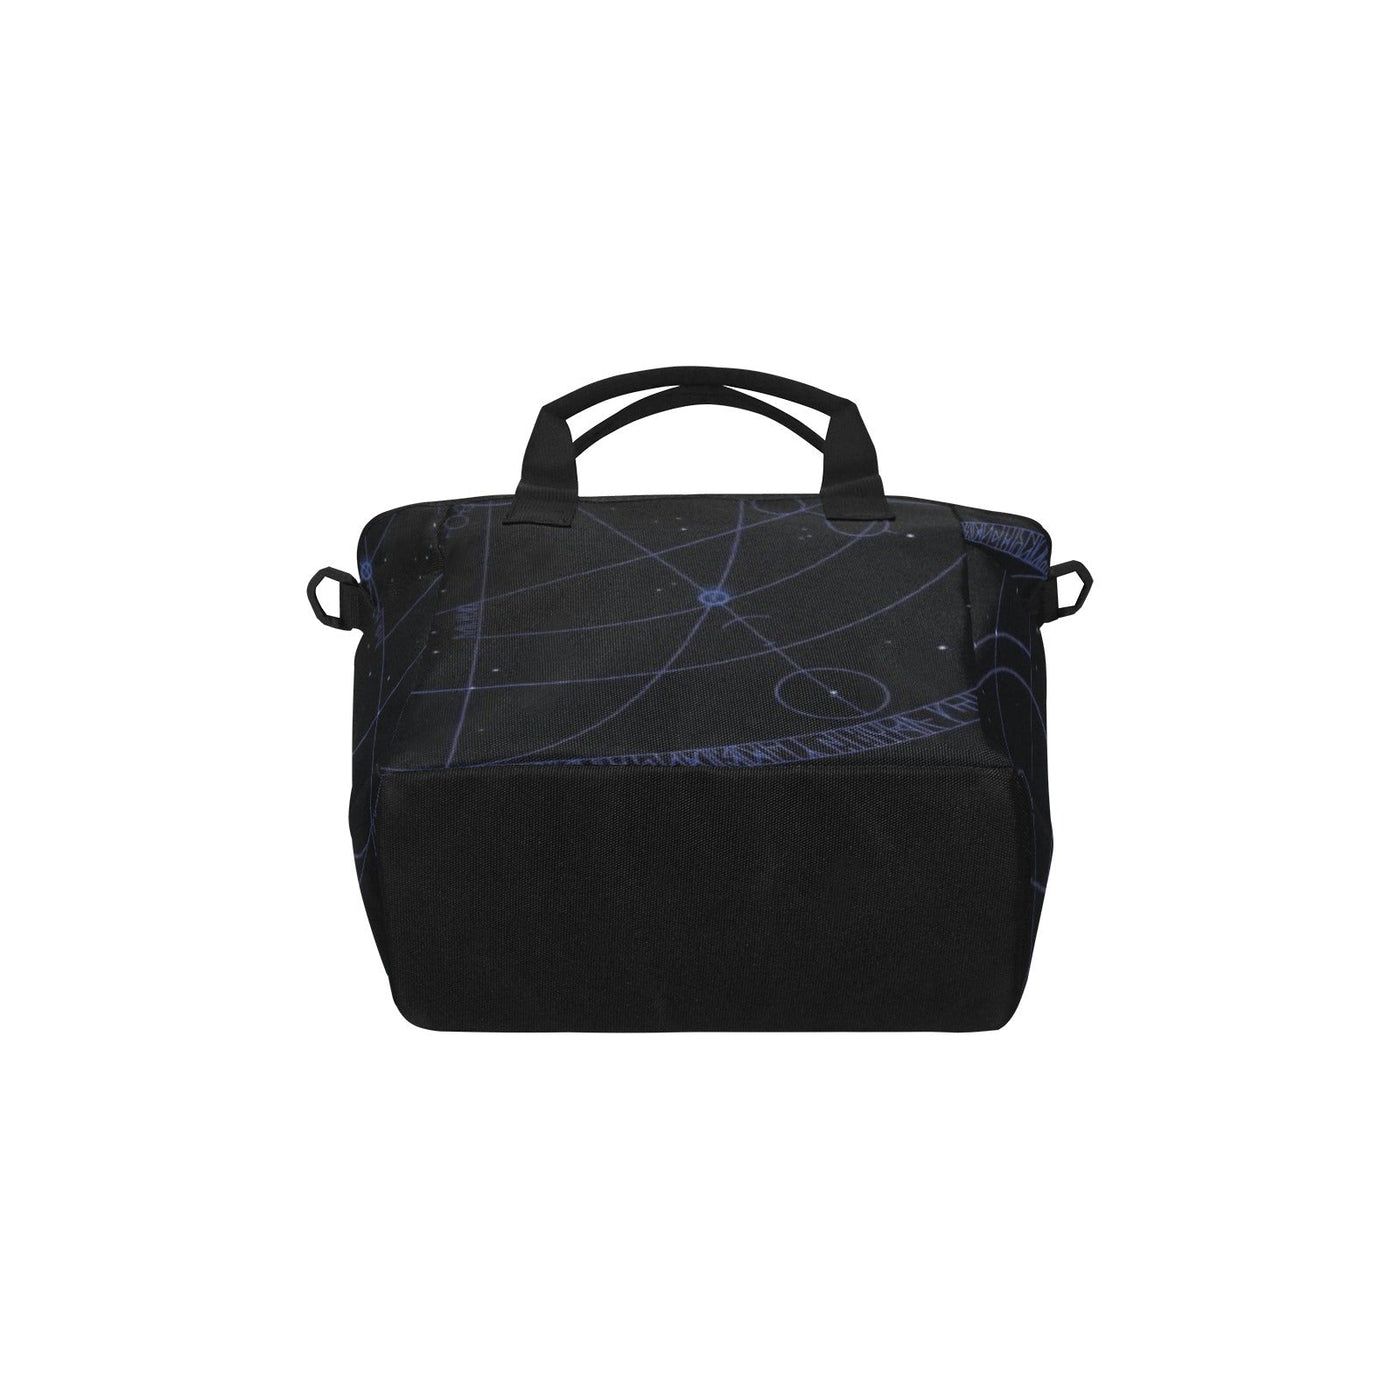 Insulated Tote Bag with Shoulder Strap (1724) Gapo Goods